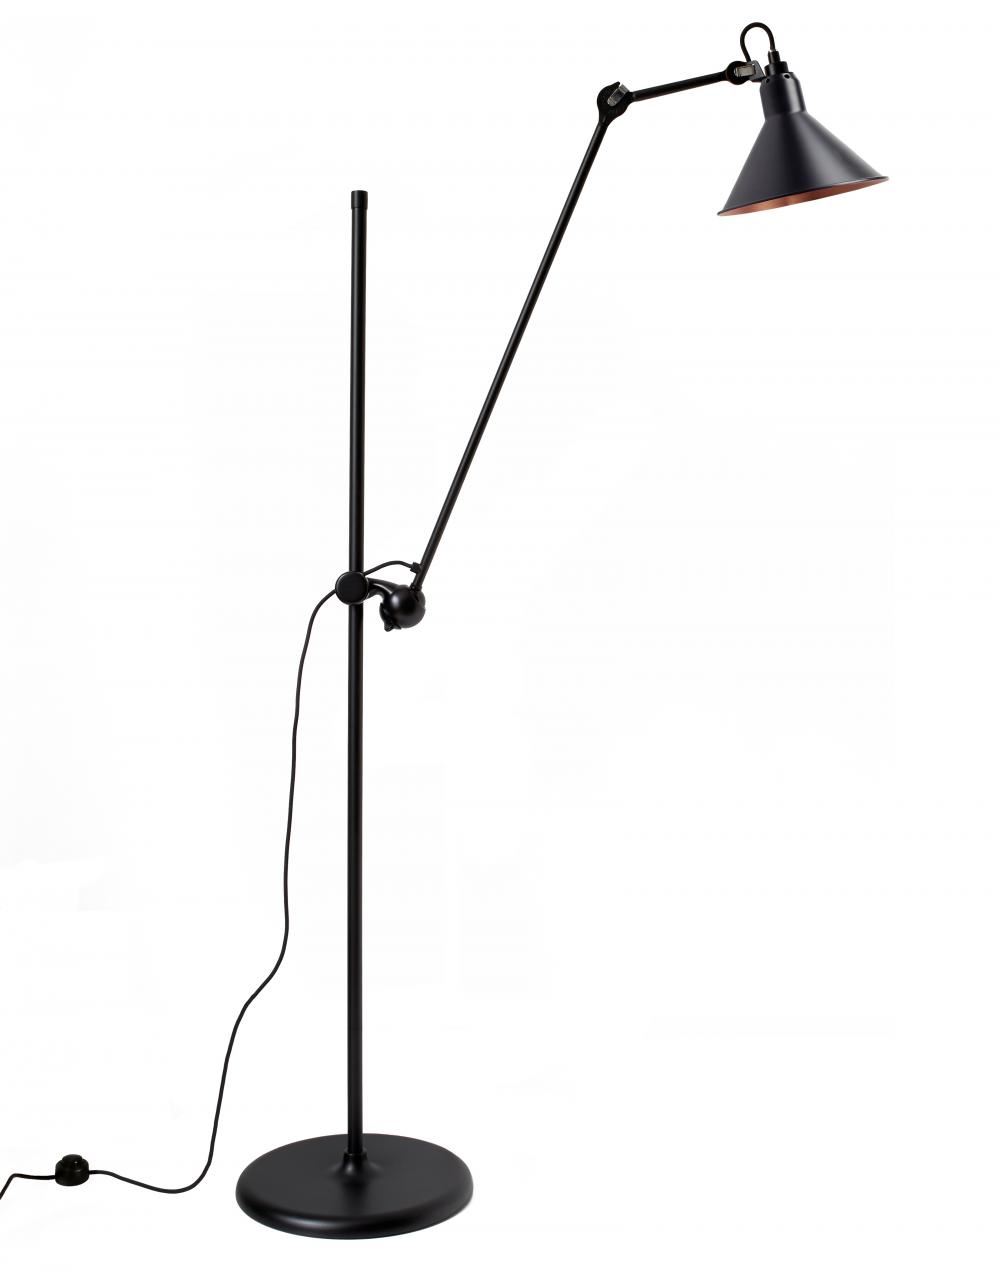 Lampe Gras 215 Floor Lamp Black Shade With Copper Interior Black Body Conical Shade